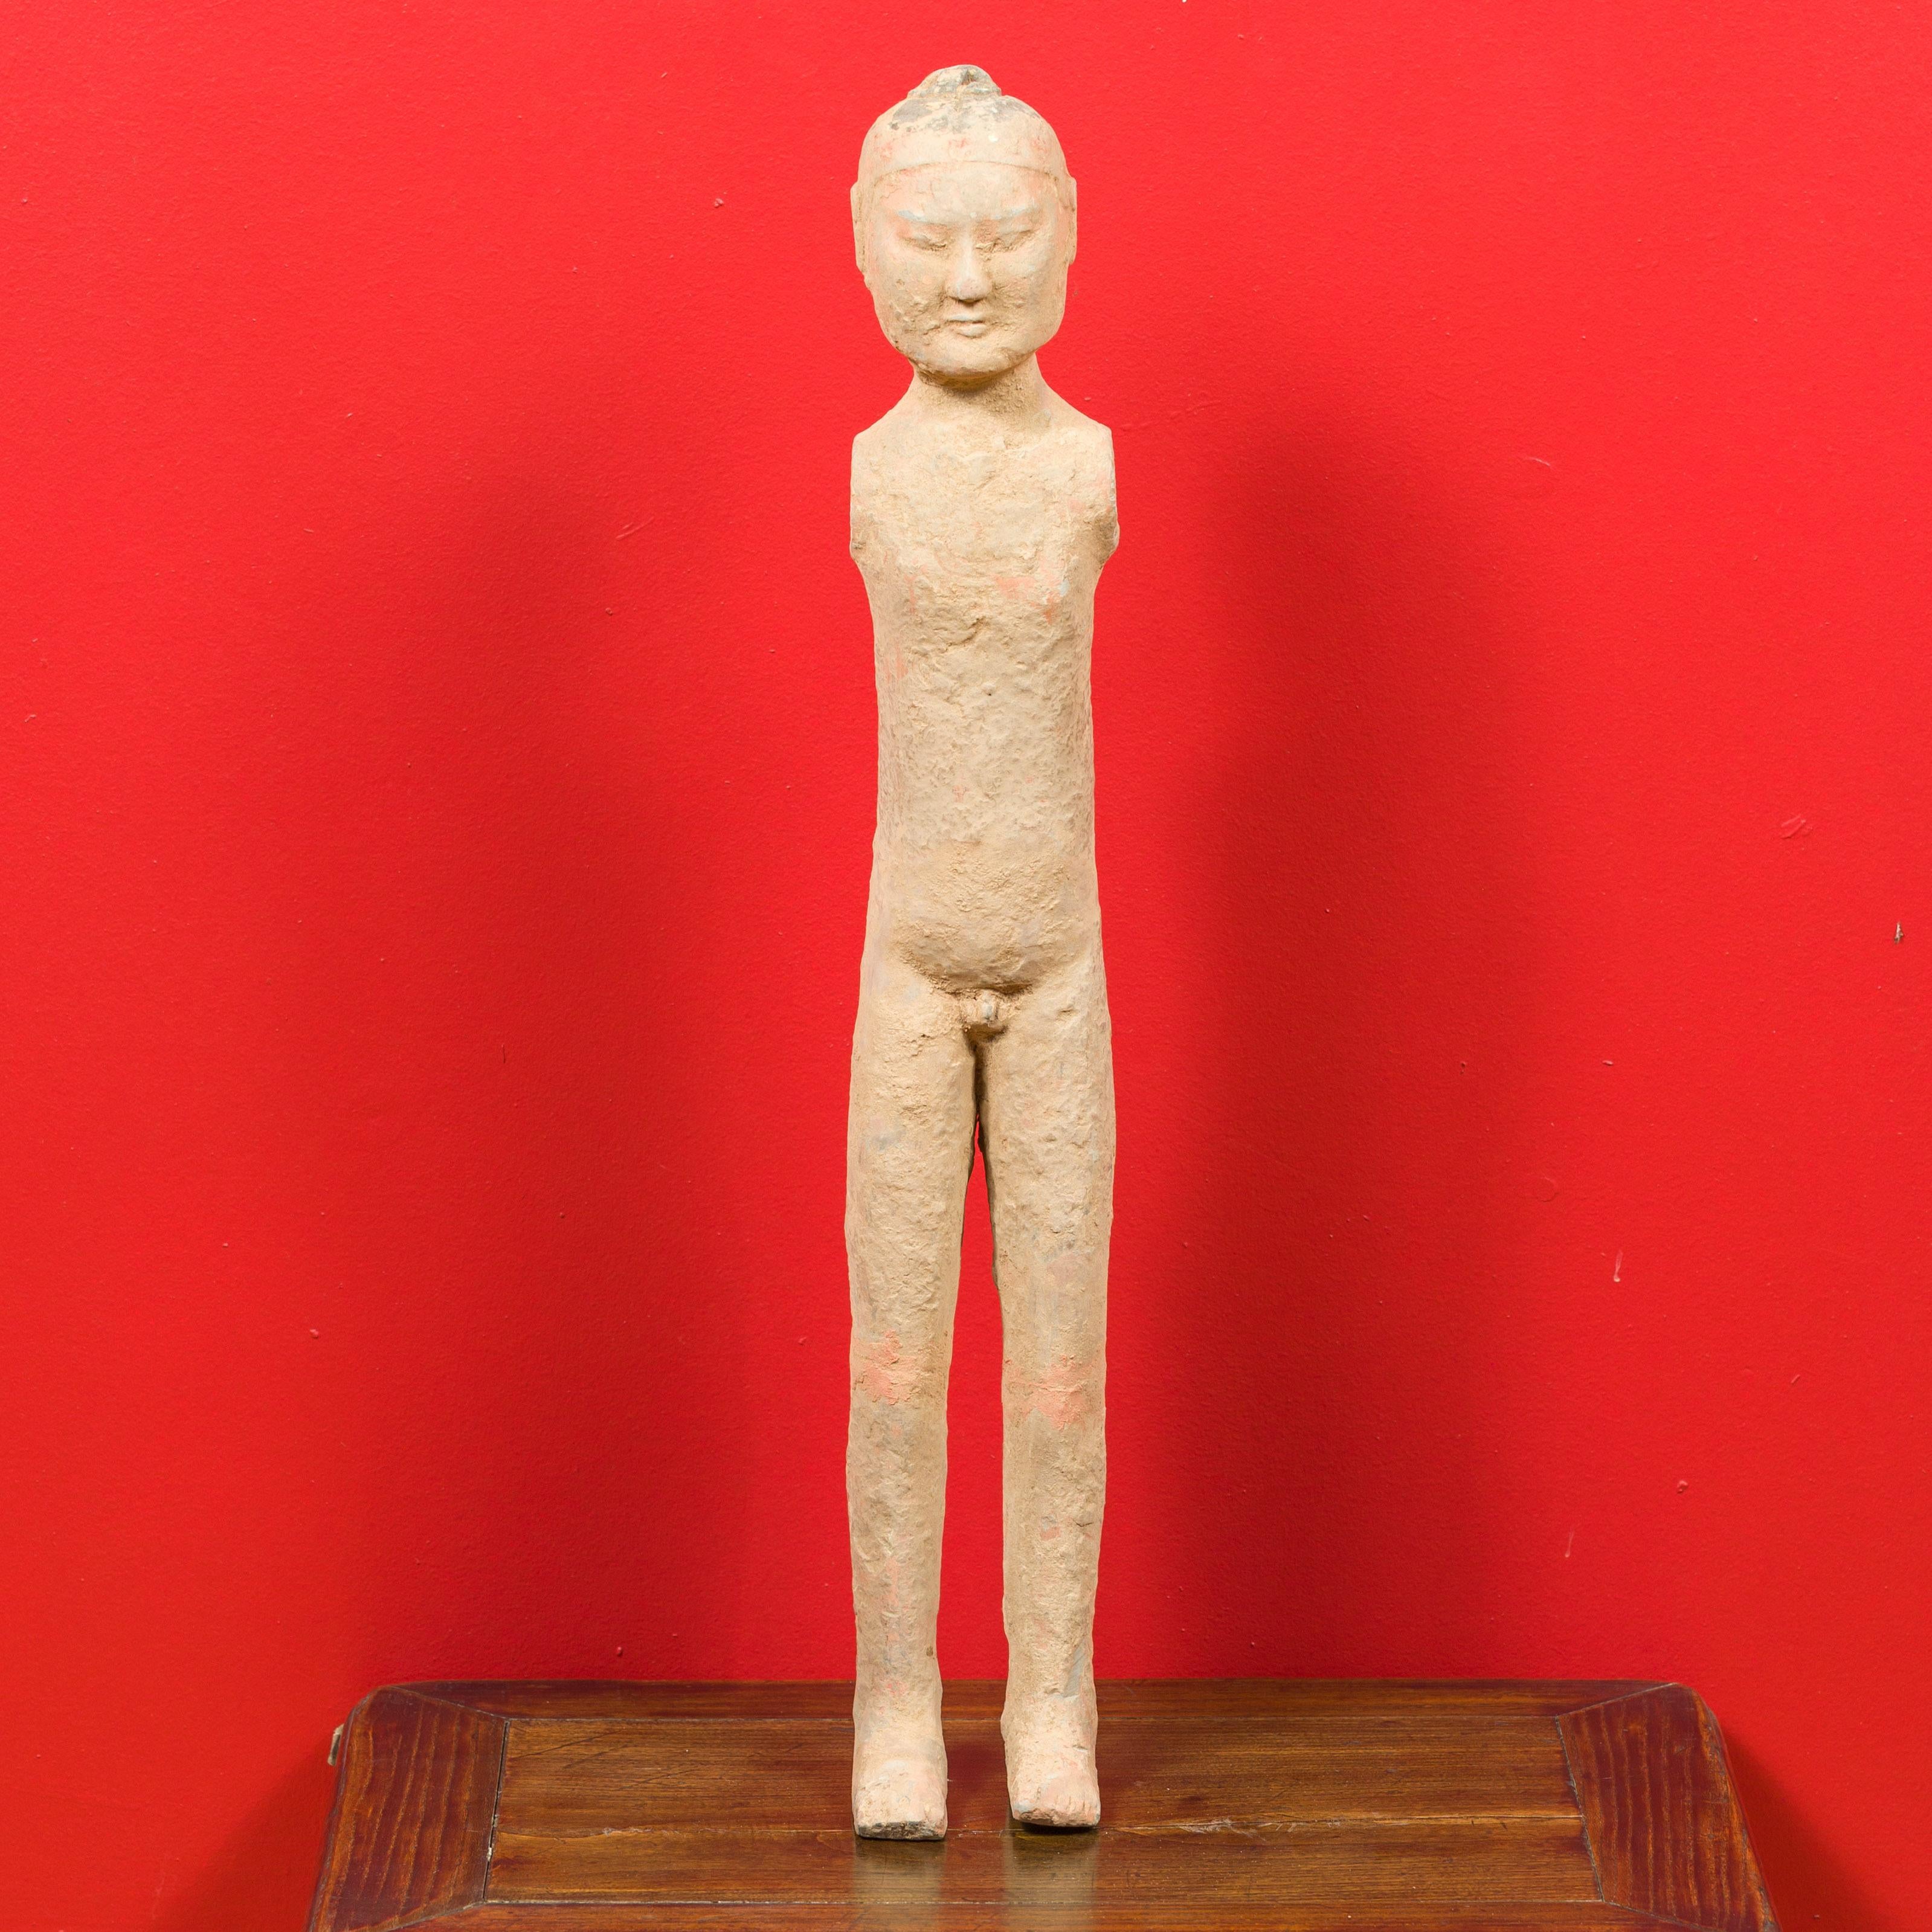 A Chinese Western Han dynasty period armless figurine with original polychromy. Born in China during the Western Han Dynasty (206 BC-24 AD), this naked and armless figurine features a polished surface showing its original polychrome. These figurines